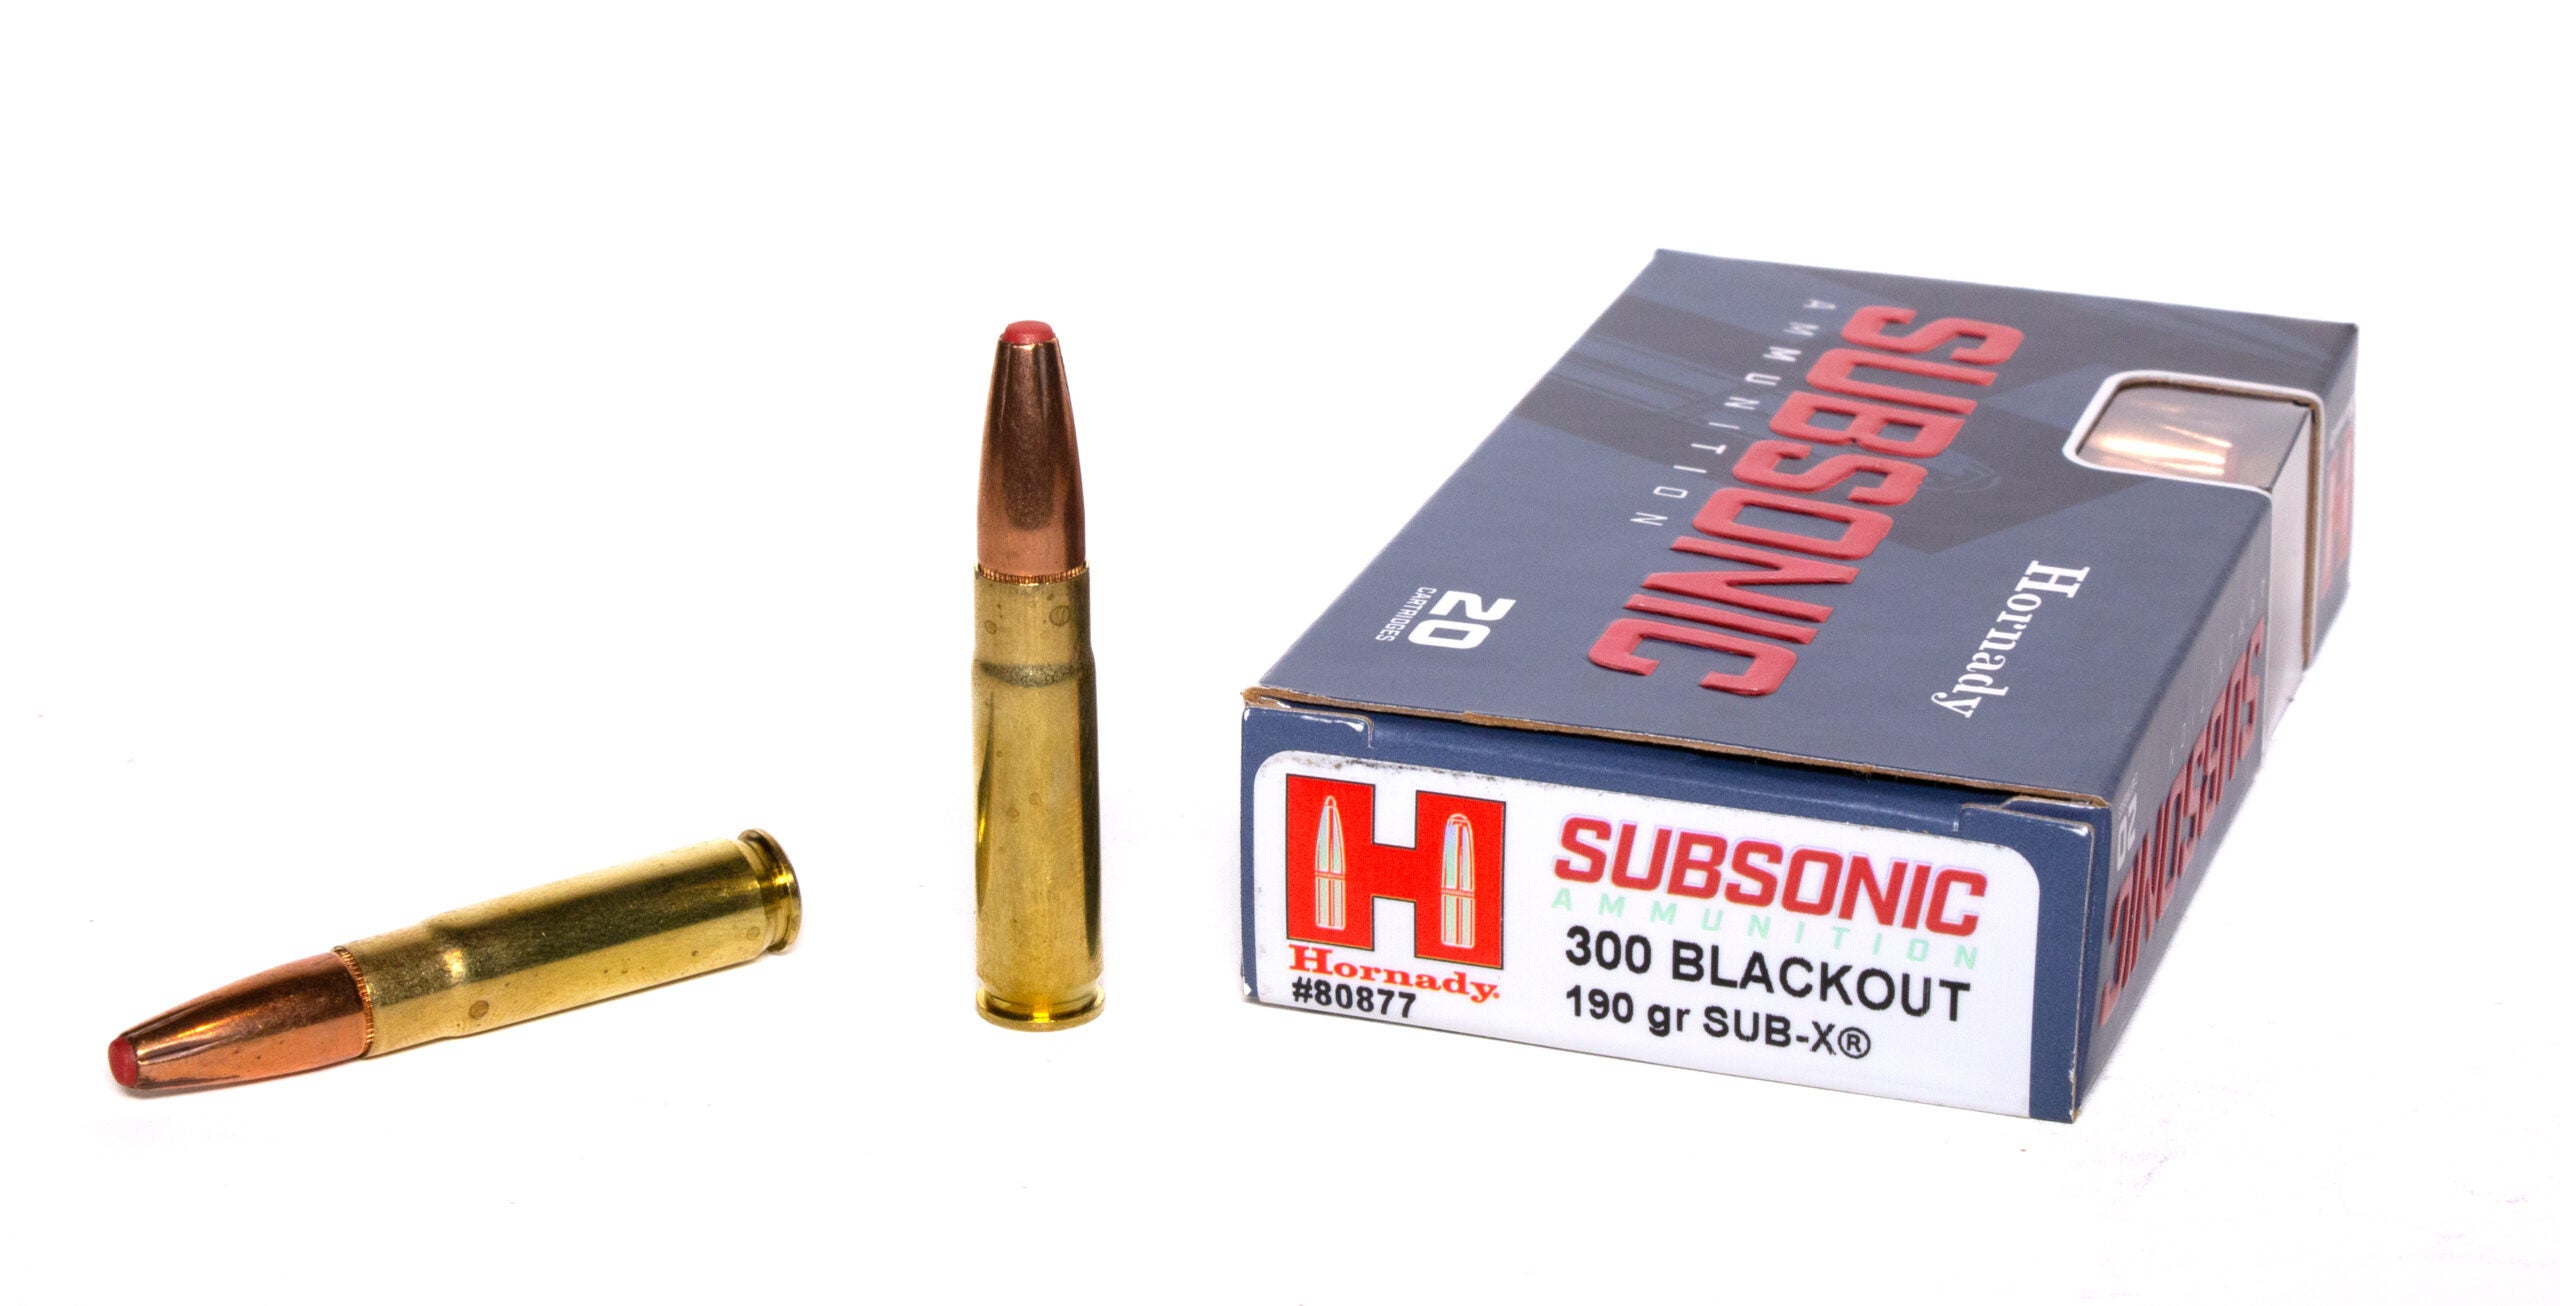 A box of 300 Blackout ammo and two loose cartridges on a white background.